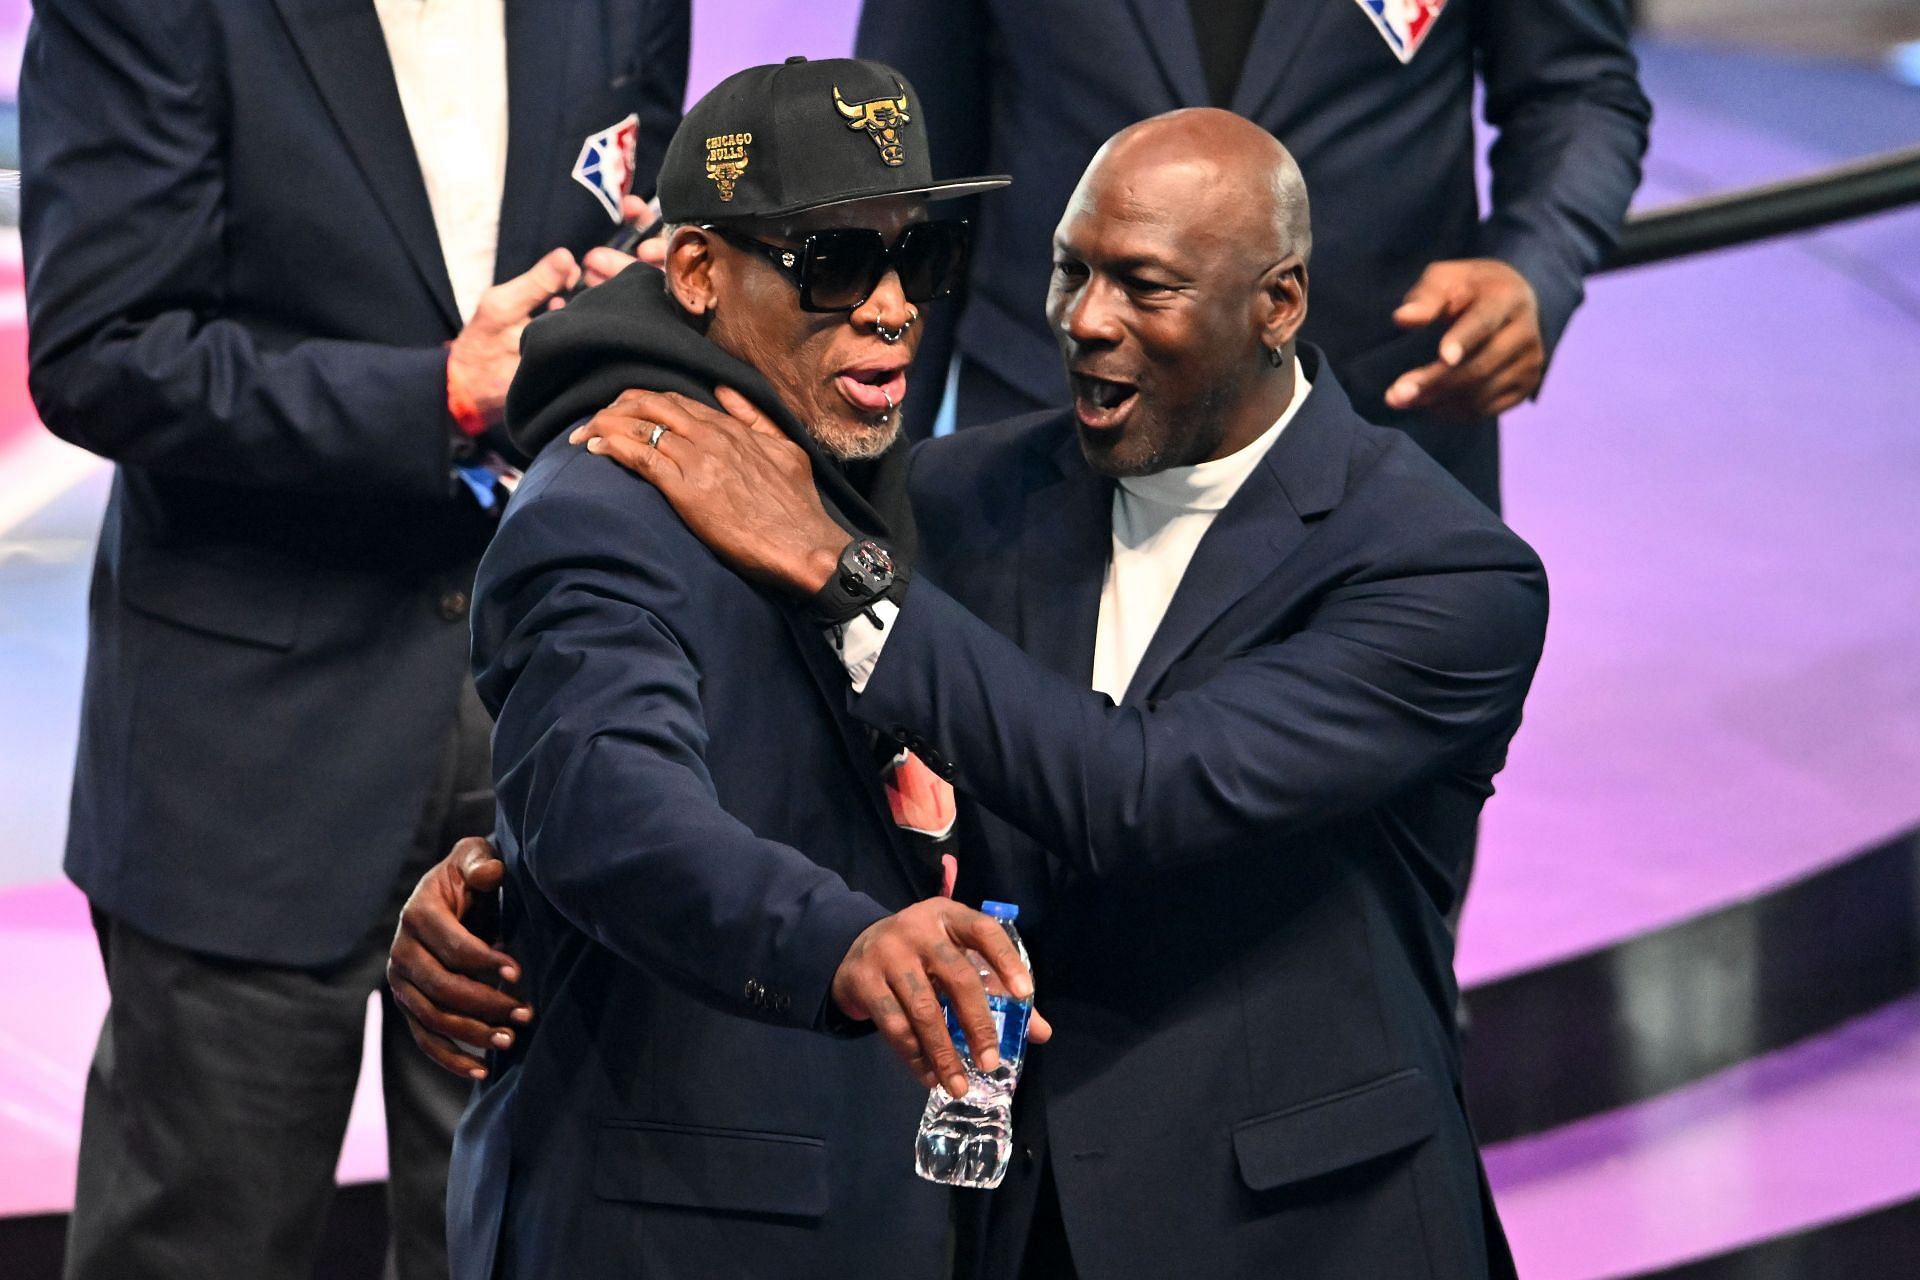 Jordan and Pippen after being introduced on the NBA 75th Anniversary team